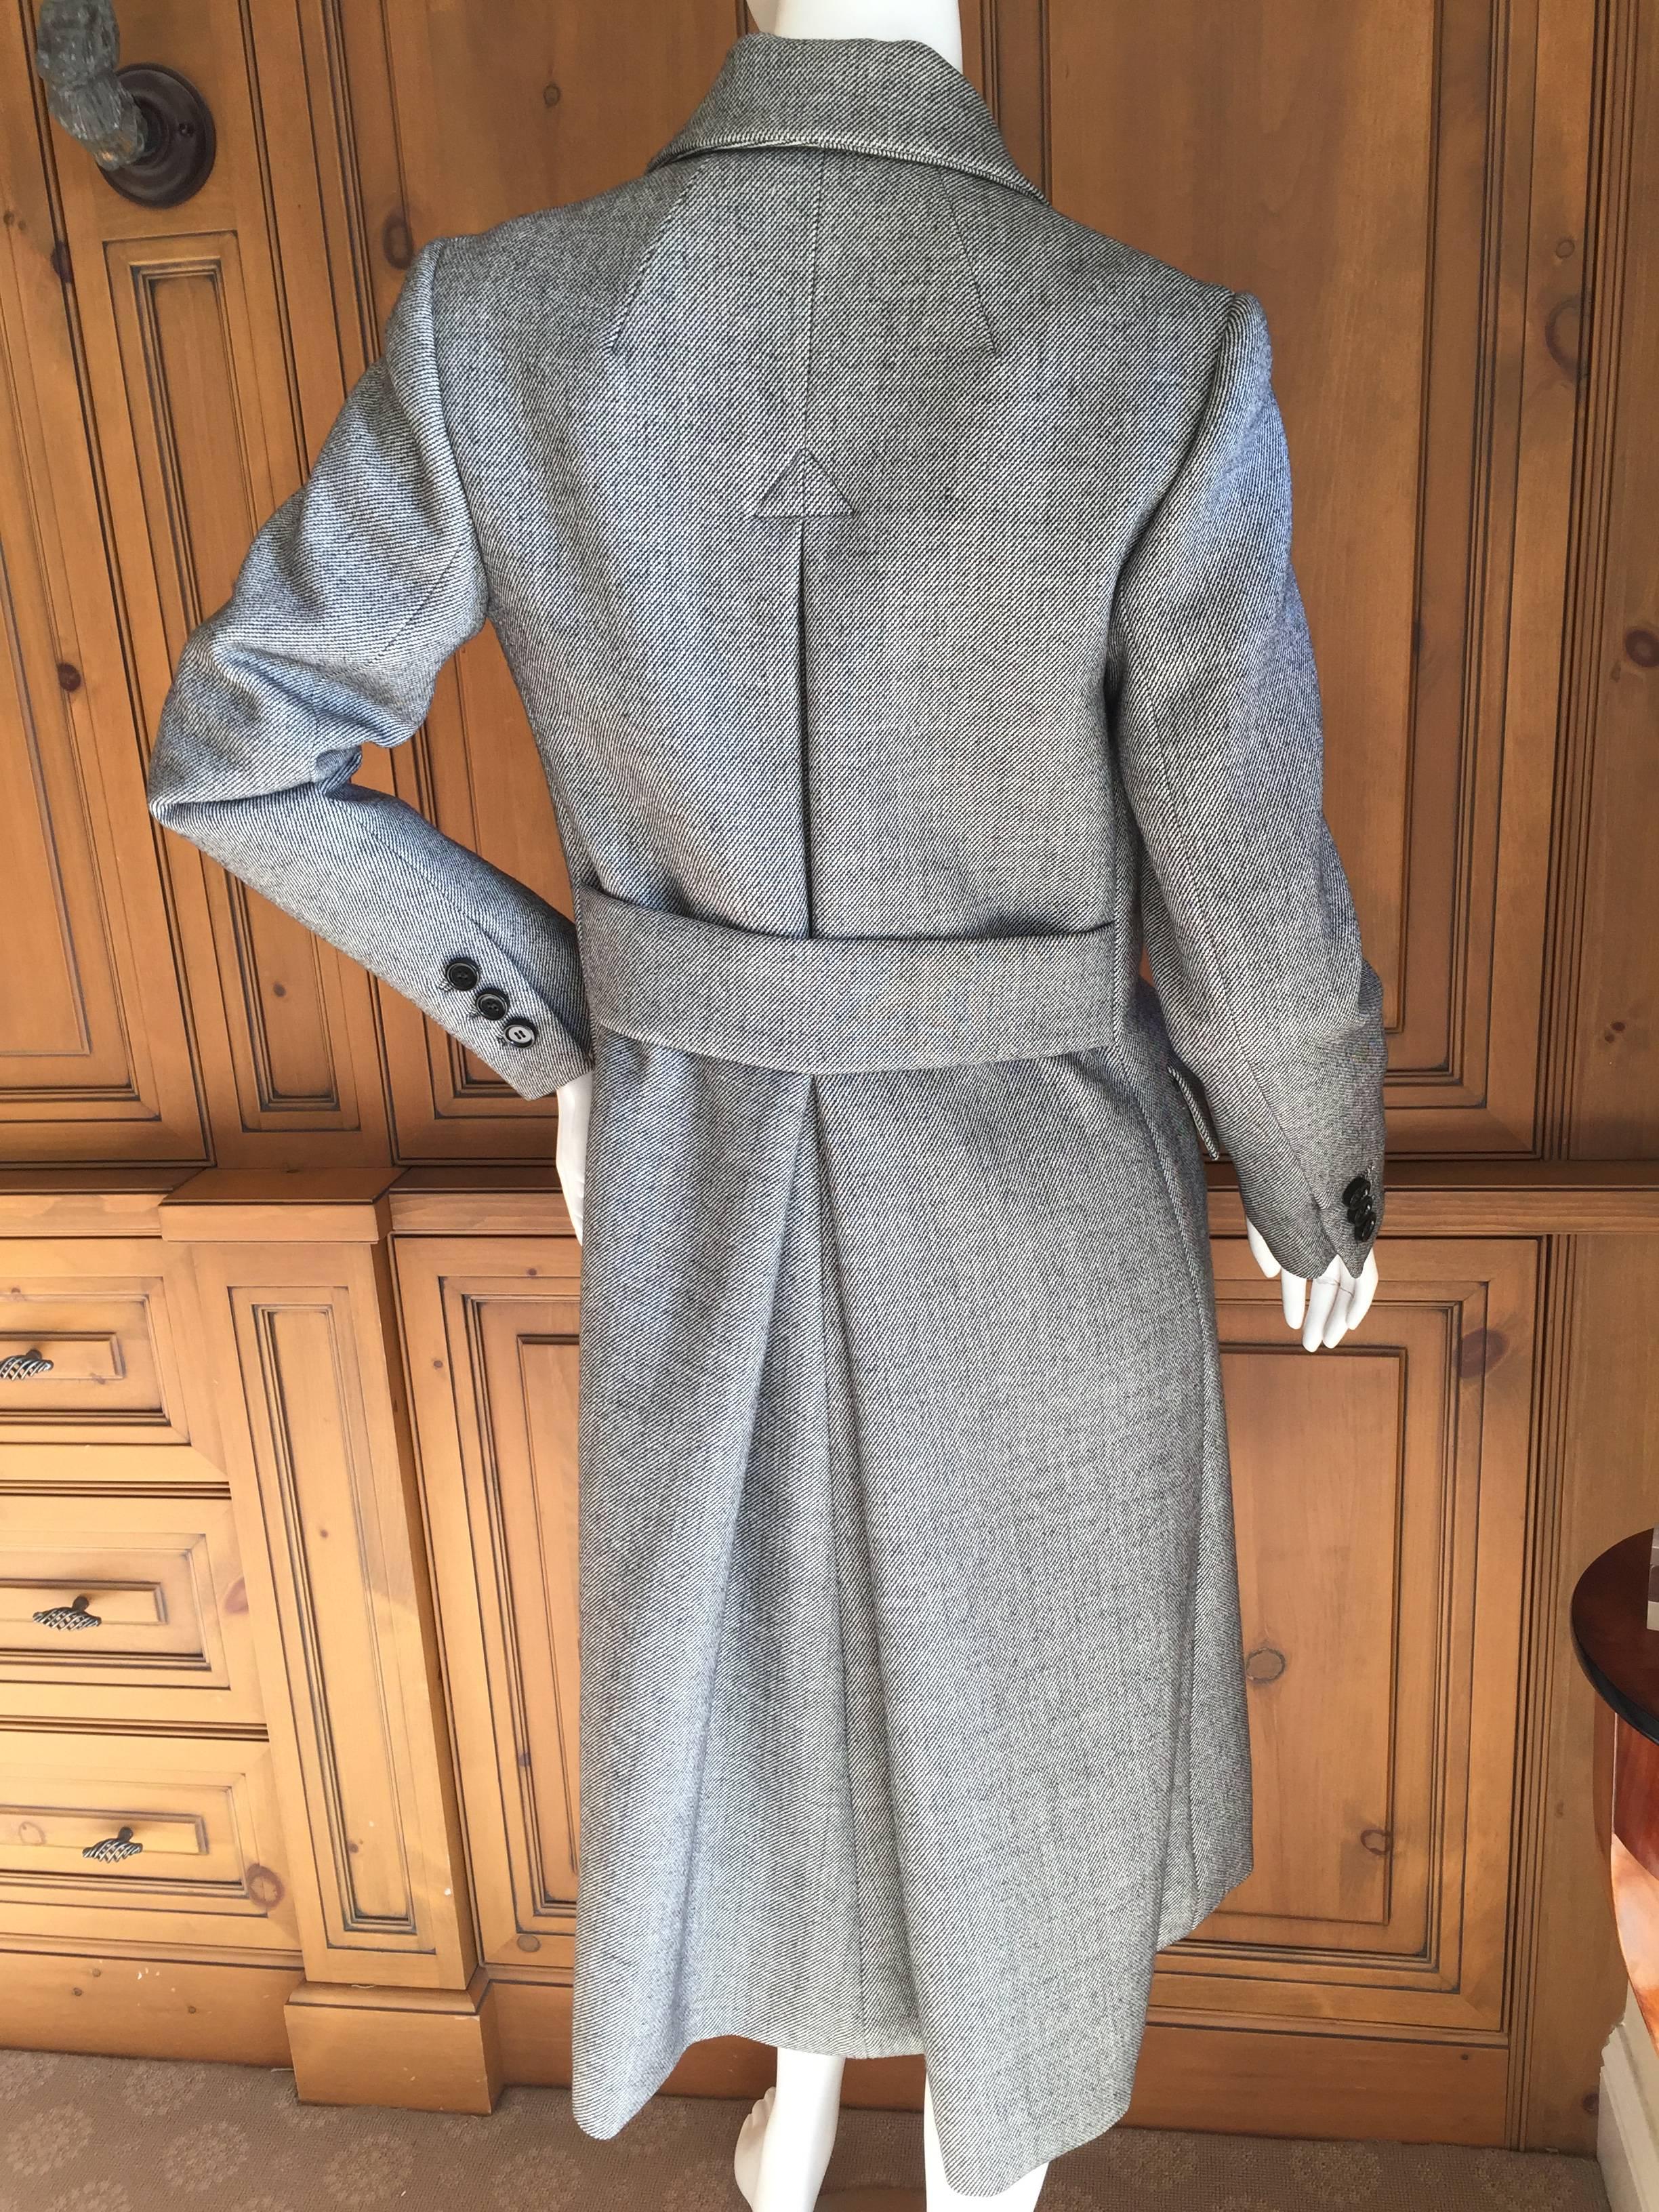 Norman Norell 1960's Gray Coat with Belt in back.
Wonderful Norell, with exaggerated collar .
Lined in silk taffeta, all hand finished.
Size 10
Bust 40